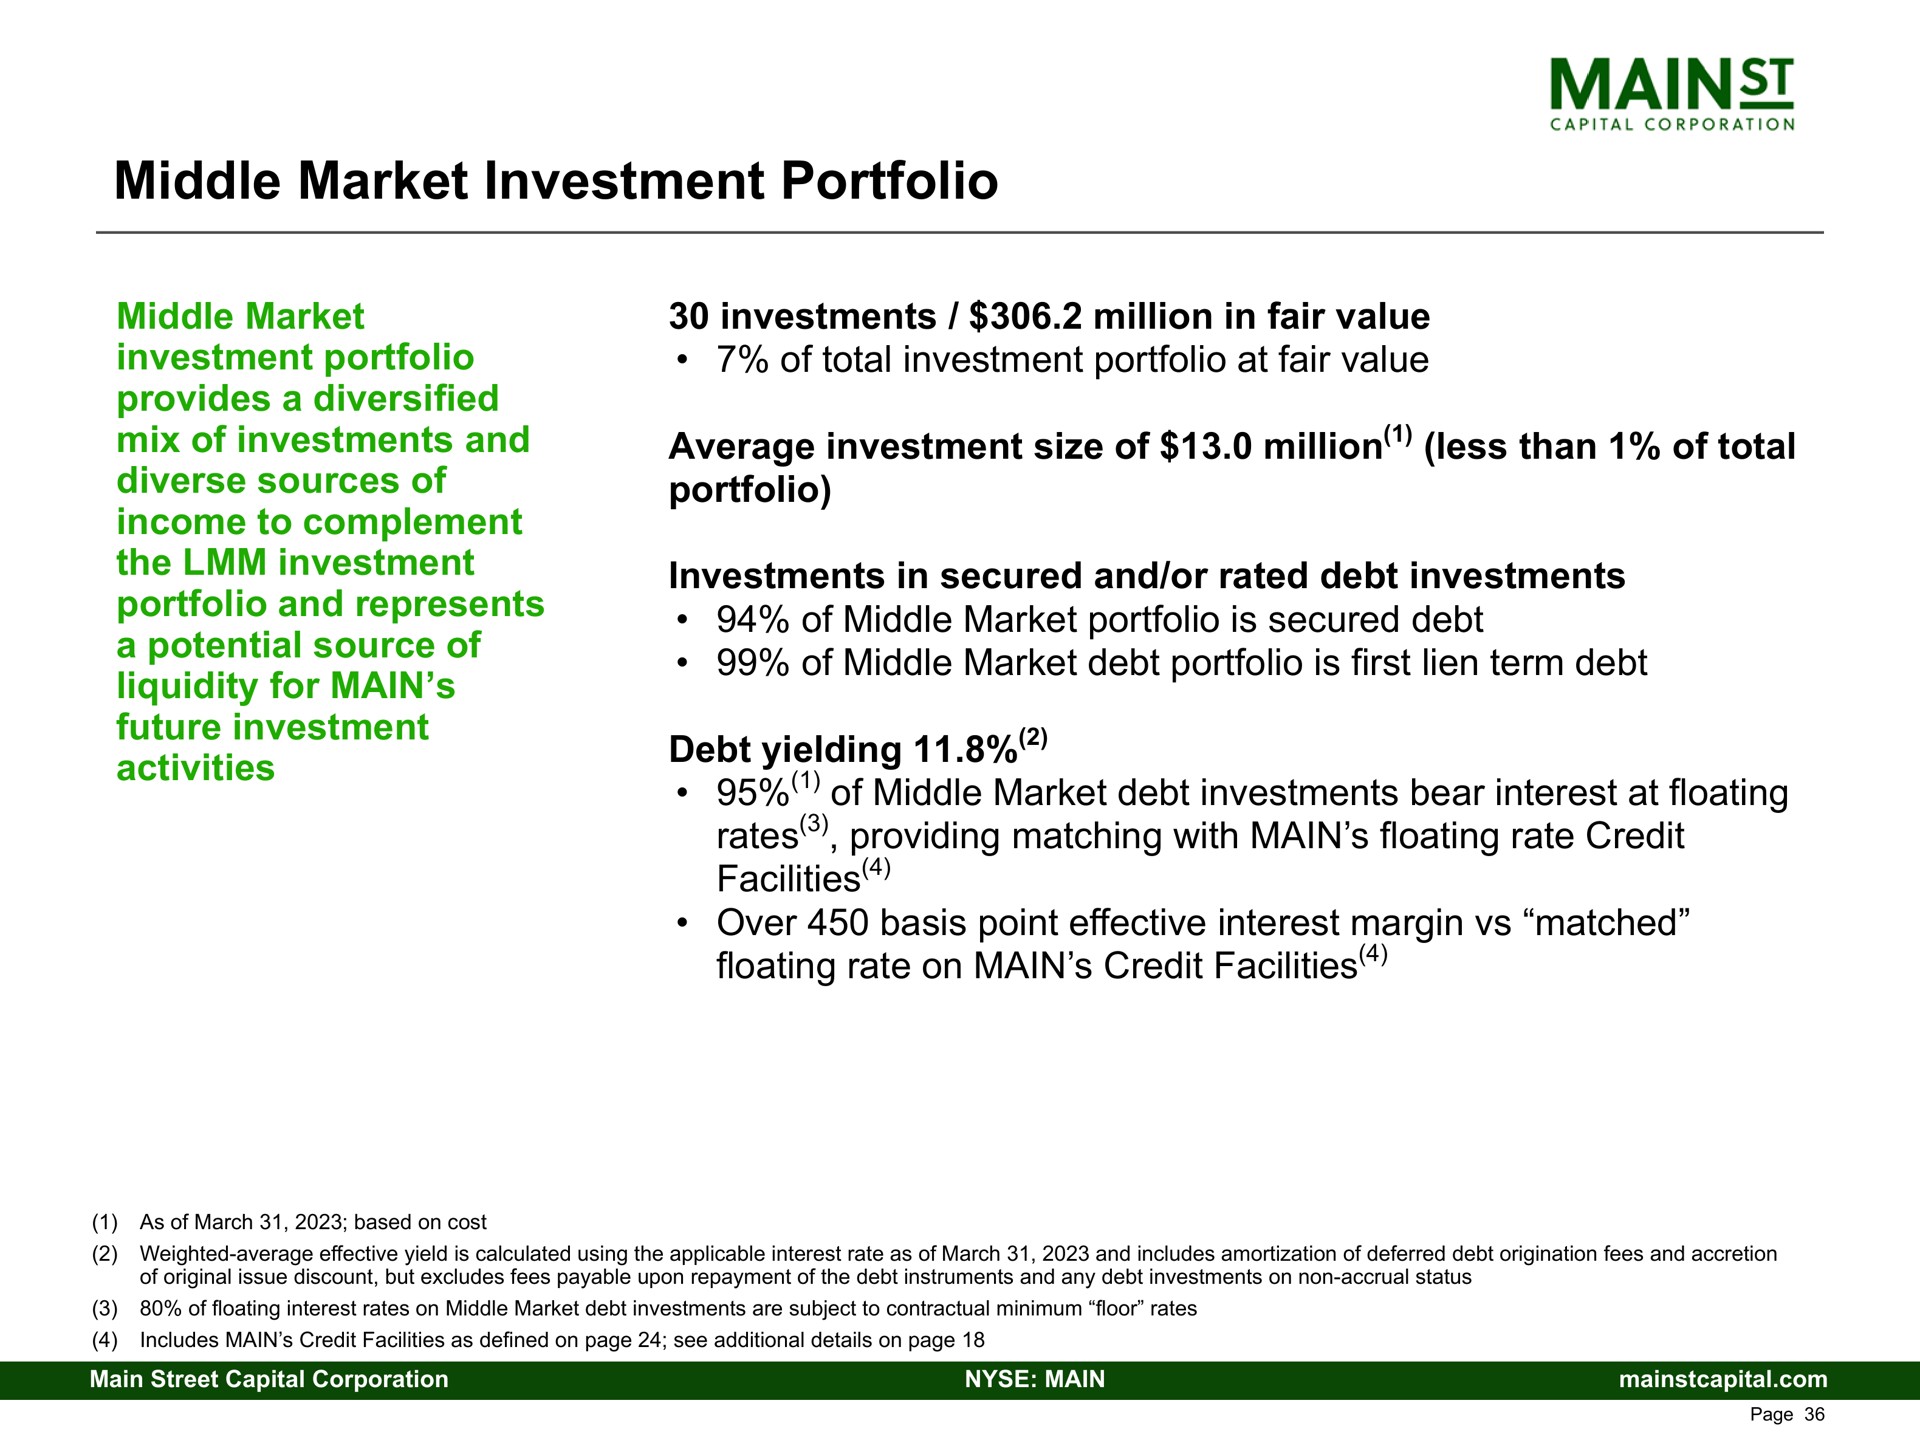 middle market investment portfolio middle market investment portfolio provides a diversified mix of investments and diverse sources of income to complement the investment portfolio and represents a potential source of liquidity for main future investment activities investments million in fair value of total investment portfolio at fair value average investment size of million less than of total portfolio investments in secured and or rated debt investments of middle market portfolio is secured debt of middle market debt portfolio is first lien term debt debt yielding of middle market debt investments bear interest at floating rates providing matching with main floating rate credit facilities over basis point effective interest margin matched floating rate on main credit facilities | Main Street Capital